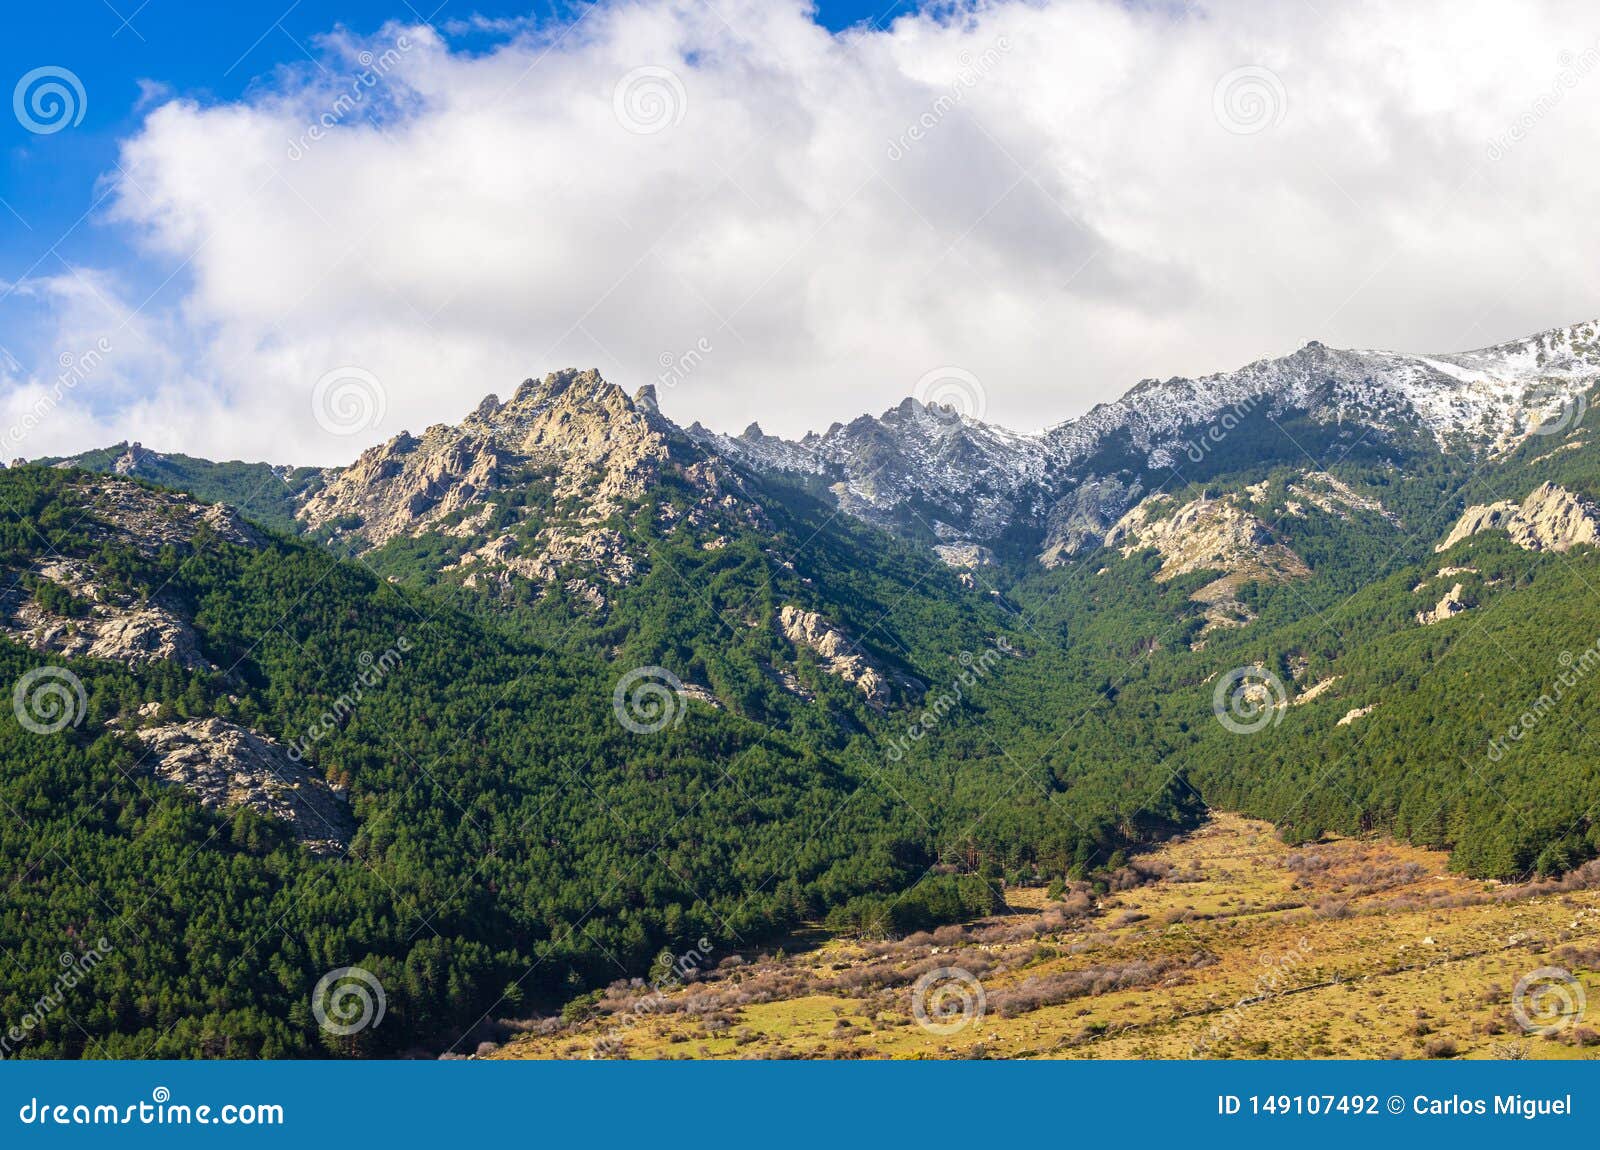 landscape of cuerda larga mountain range with snow in the summits